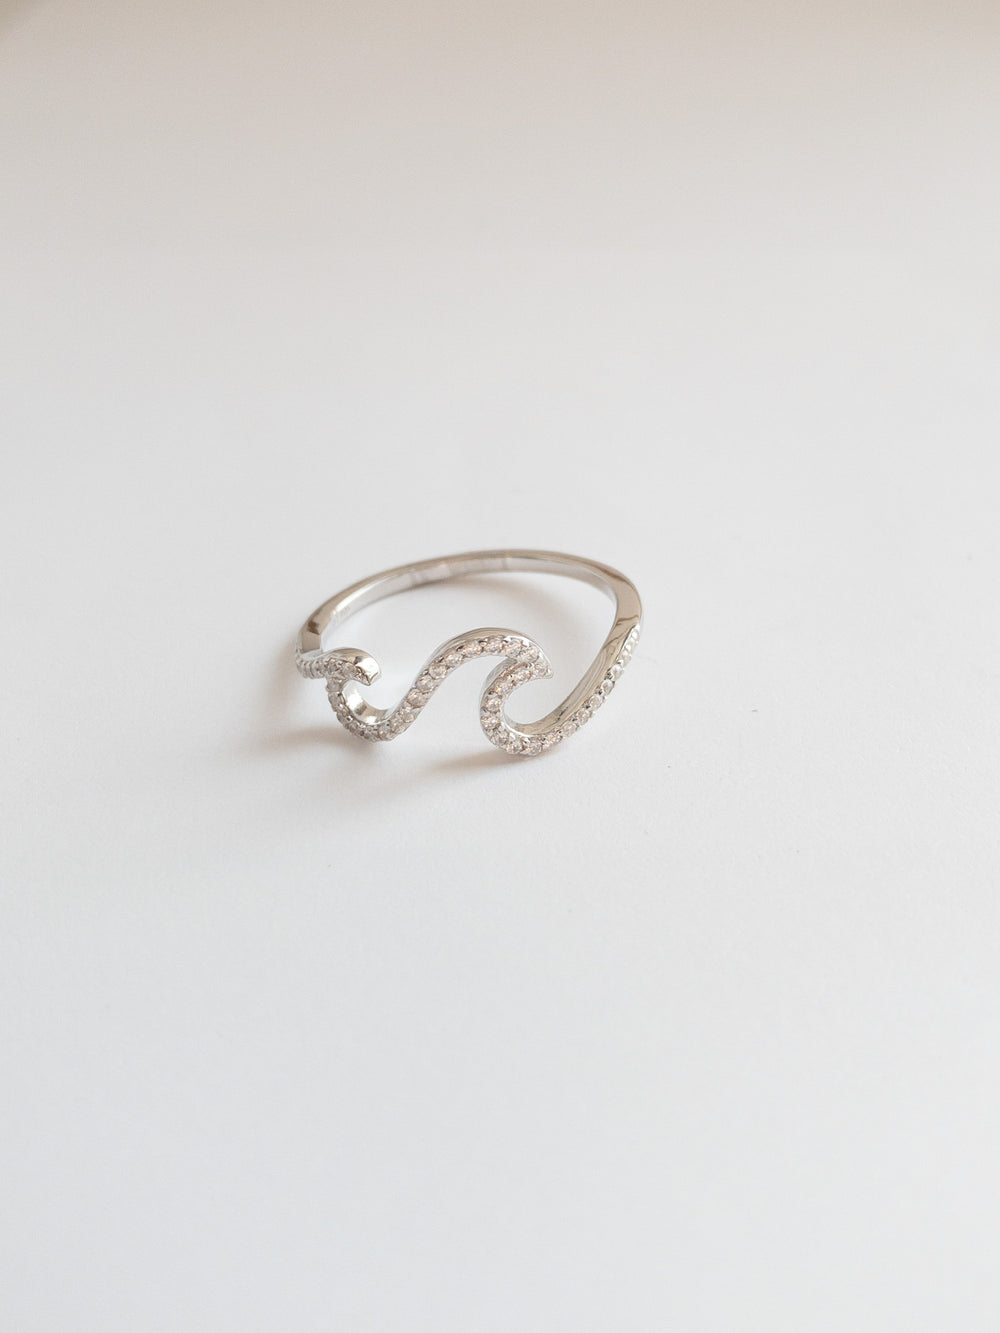 Sparkling double wave ring - sterling silver 